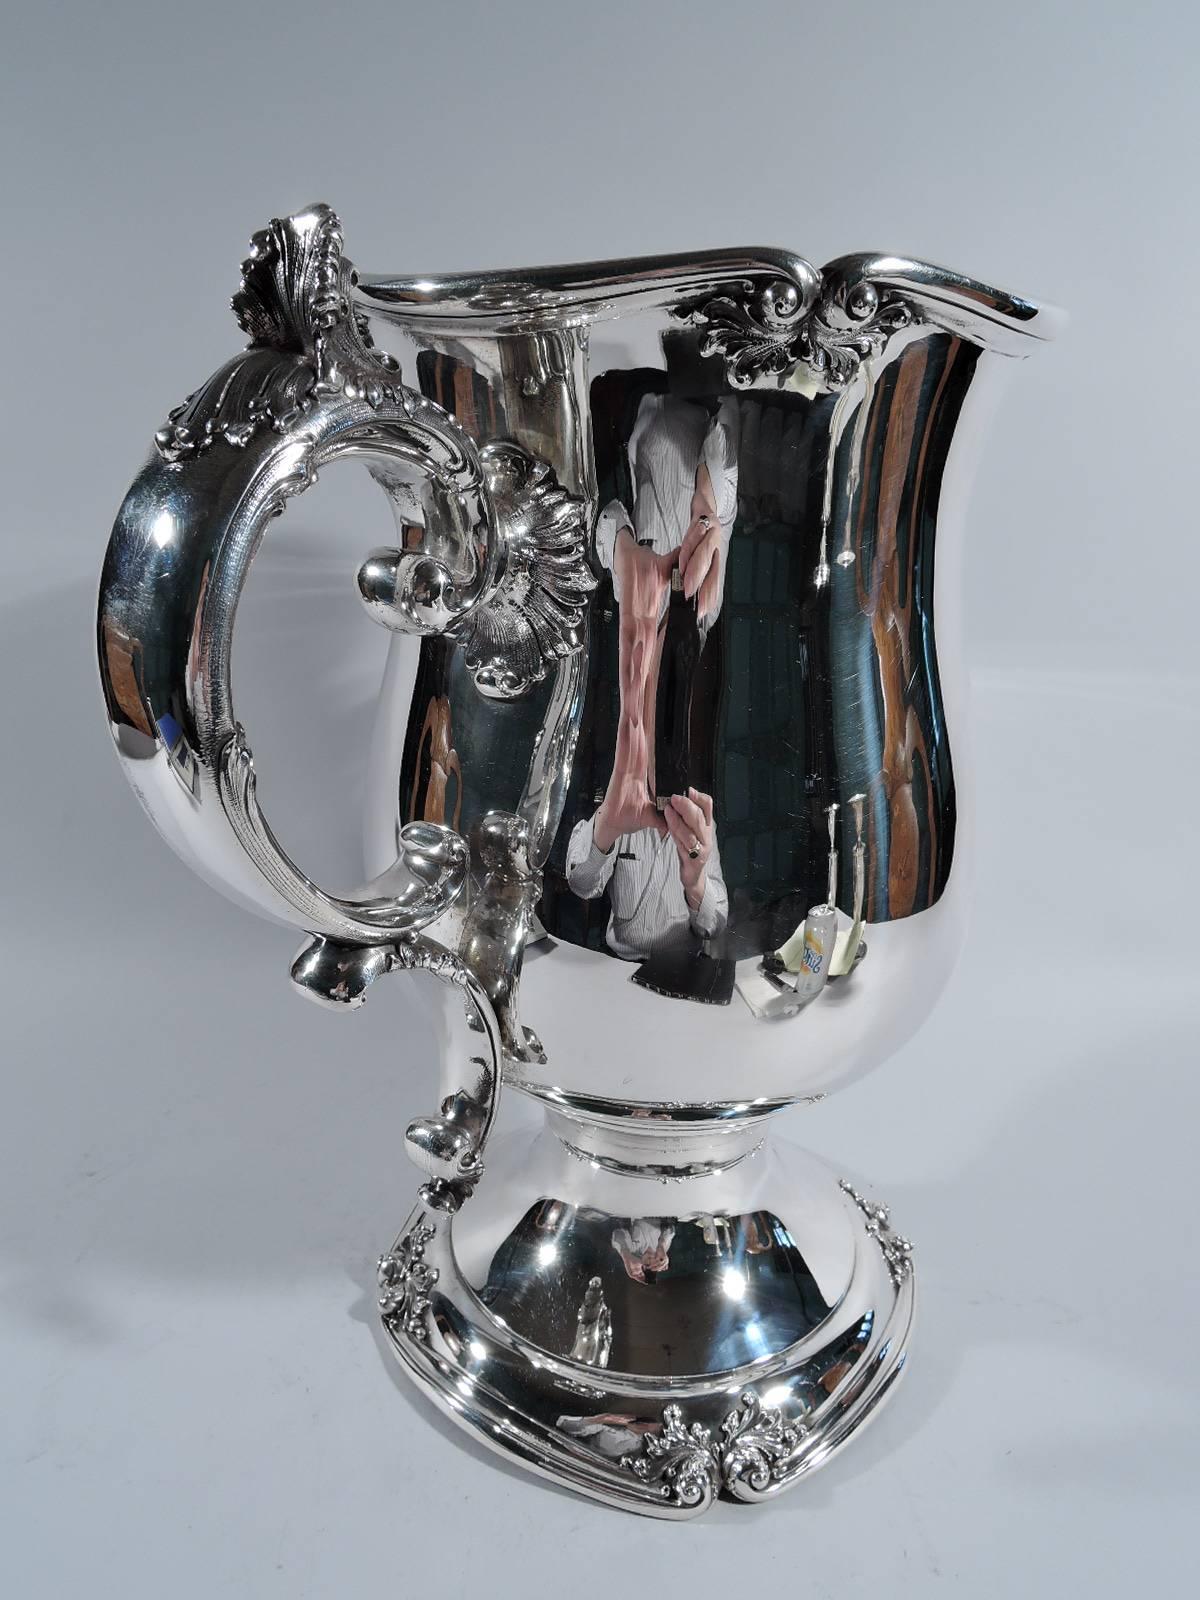 Sterling silver trophy Cup. Made by Meriden Britannia (part of International) in Meriden, Conn., circa 1890. Urn form with leaf-capped double-scroll handles and wavy rim with volute scrolls and applied leaves. Raised foot has four curved sides with